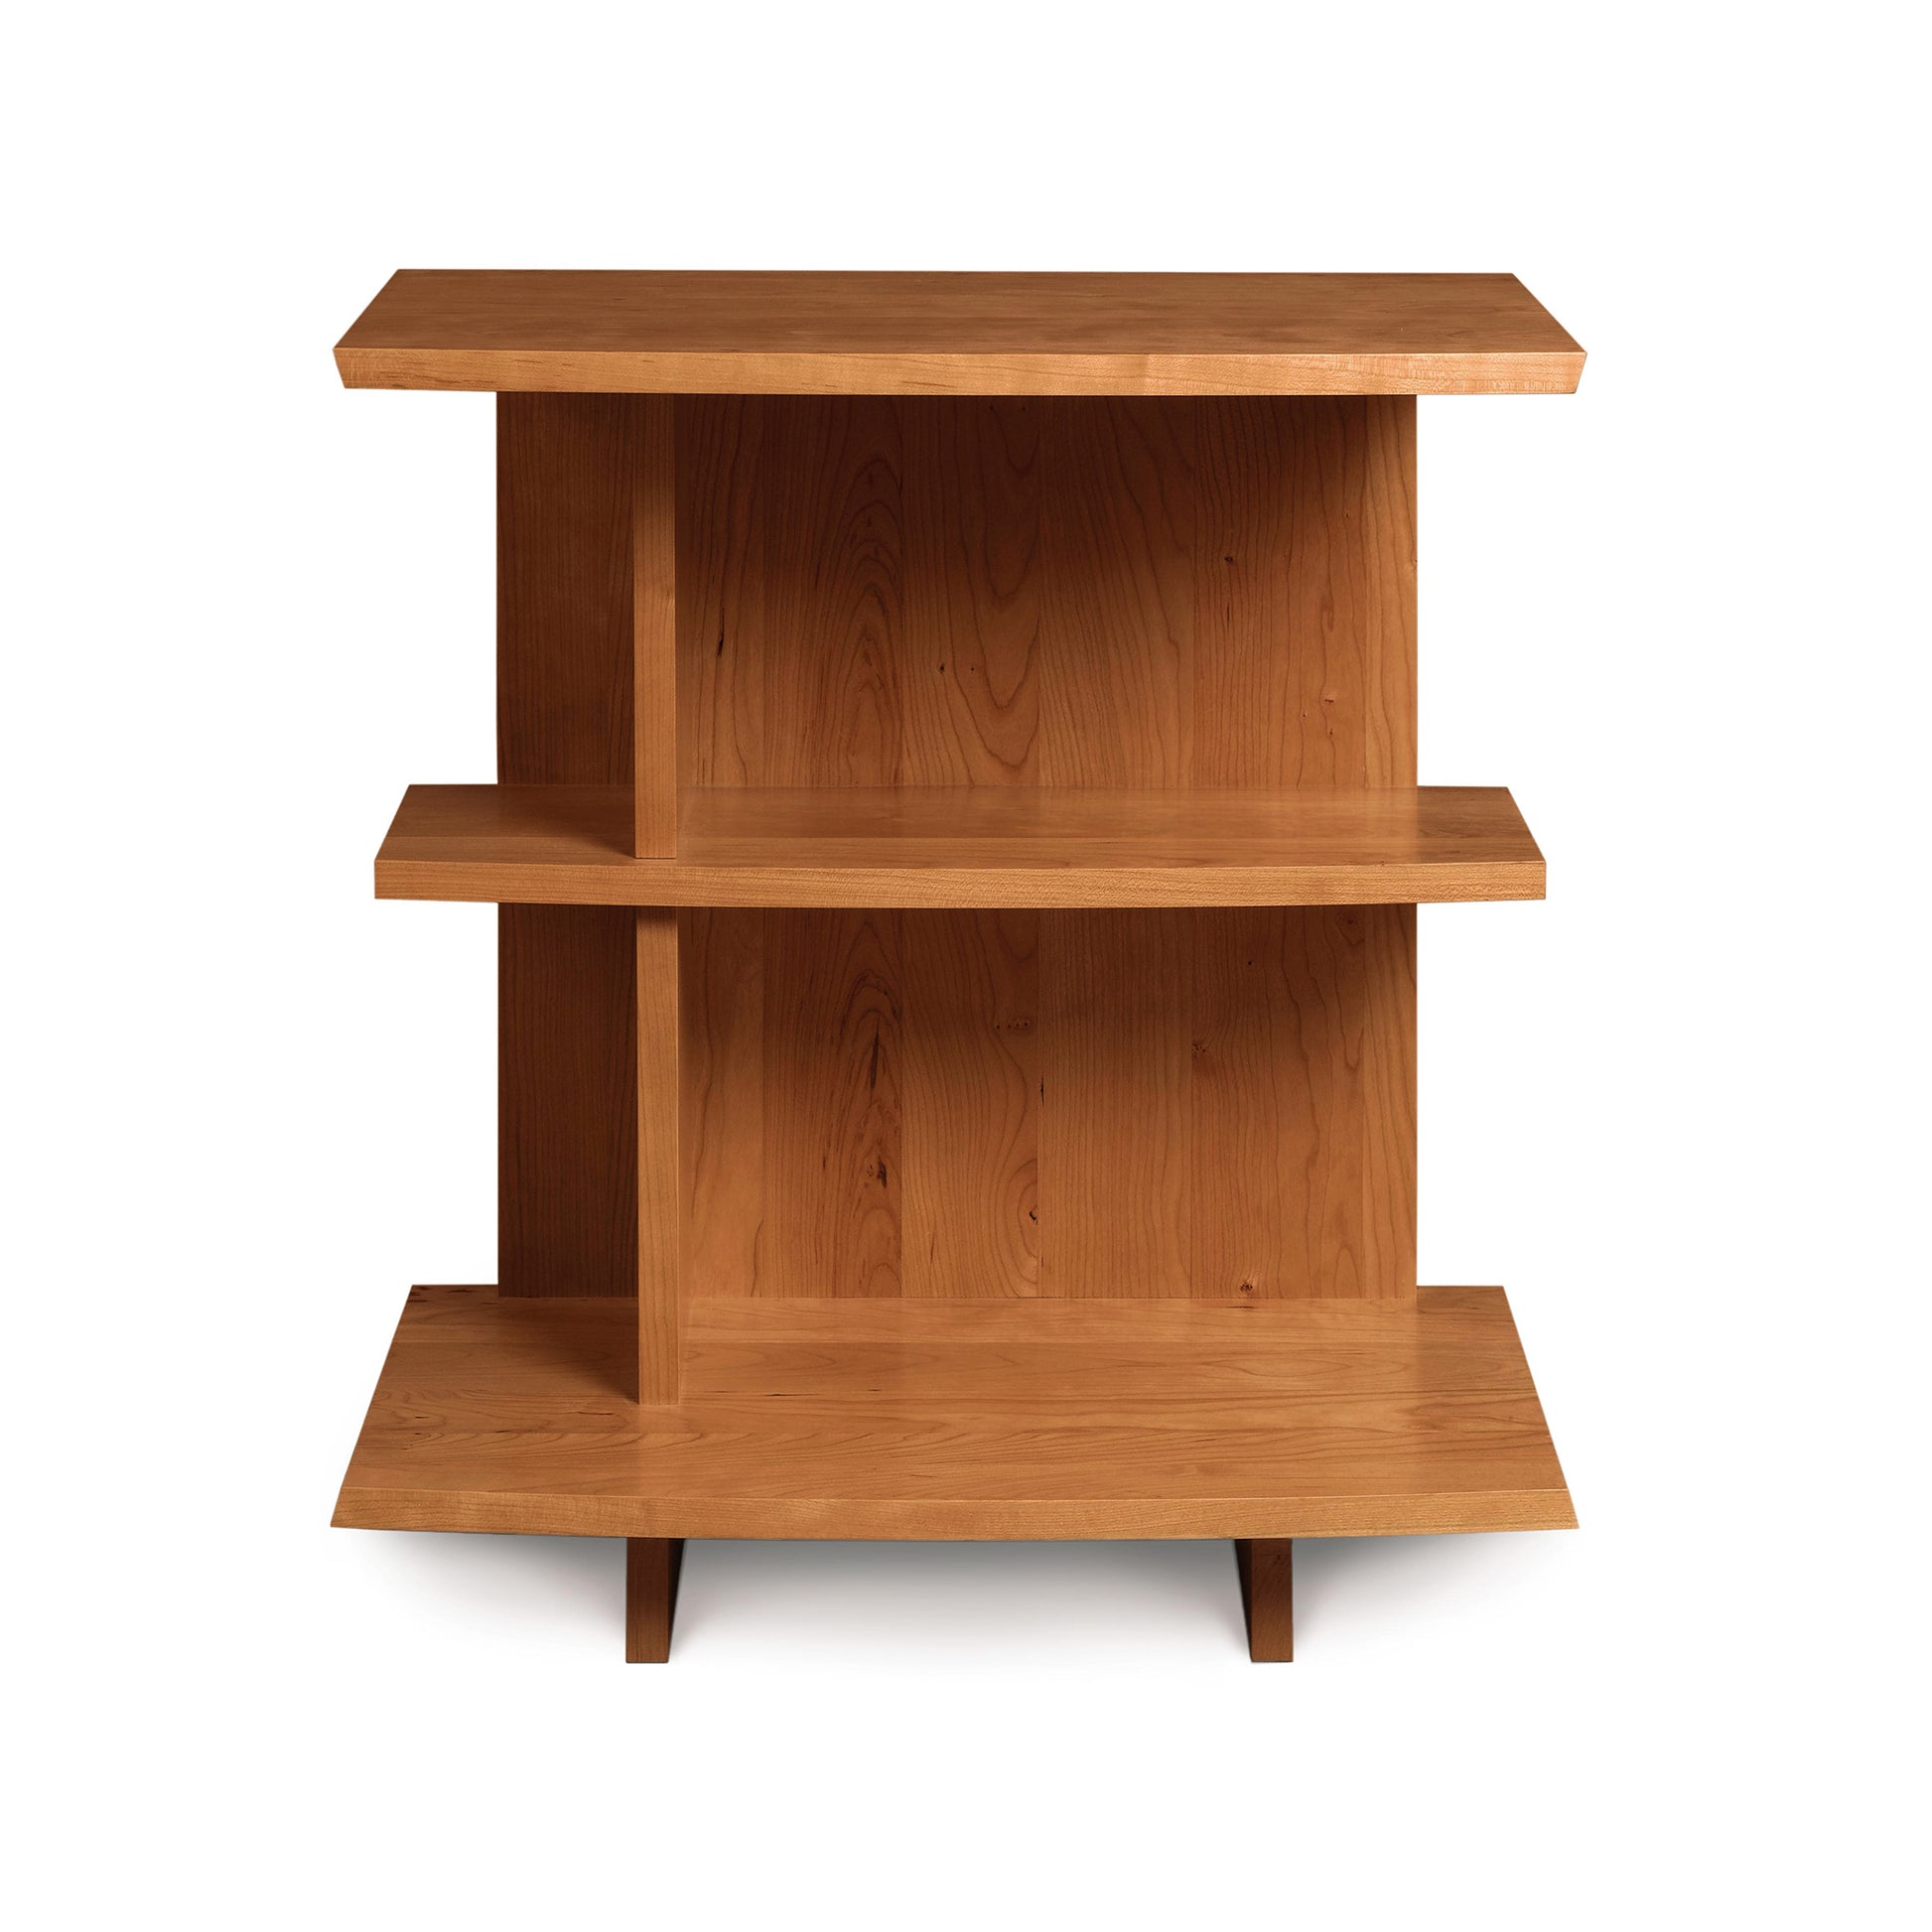 A simple Berkeley Open Shelf Nightstand - Left by Copeland Furniture on a plain background.